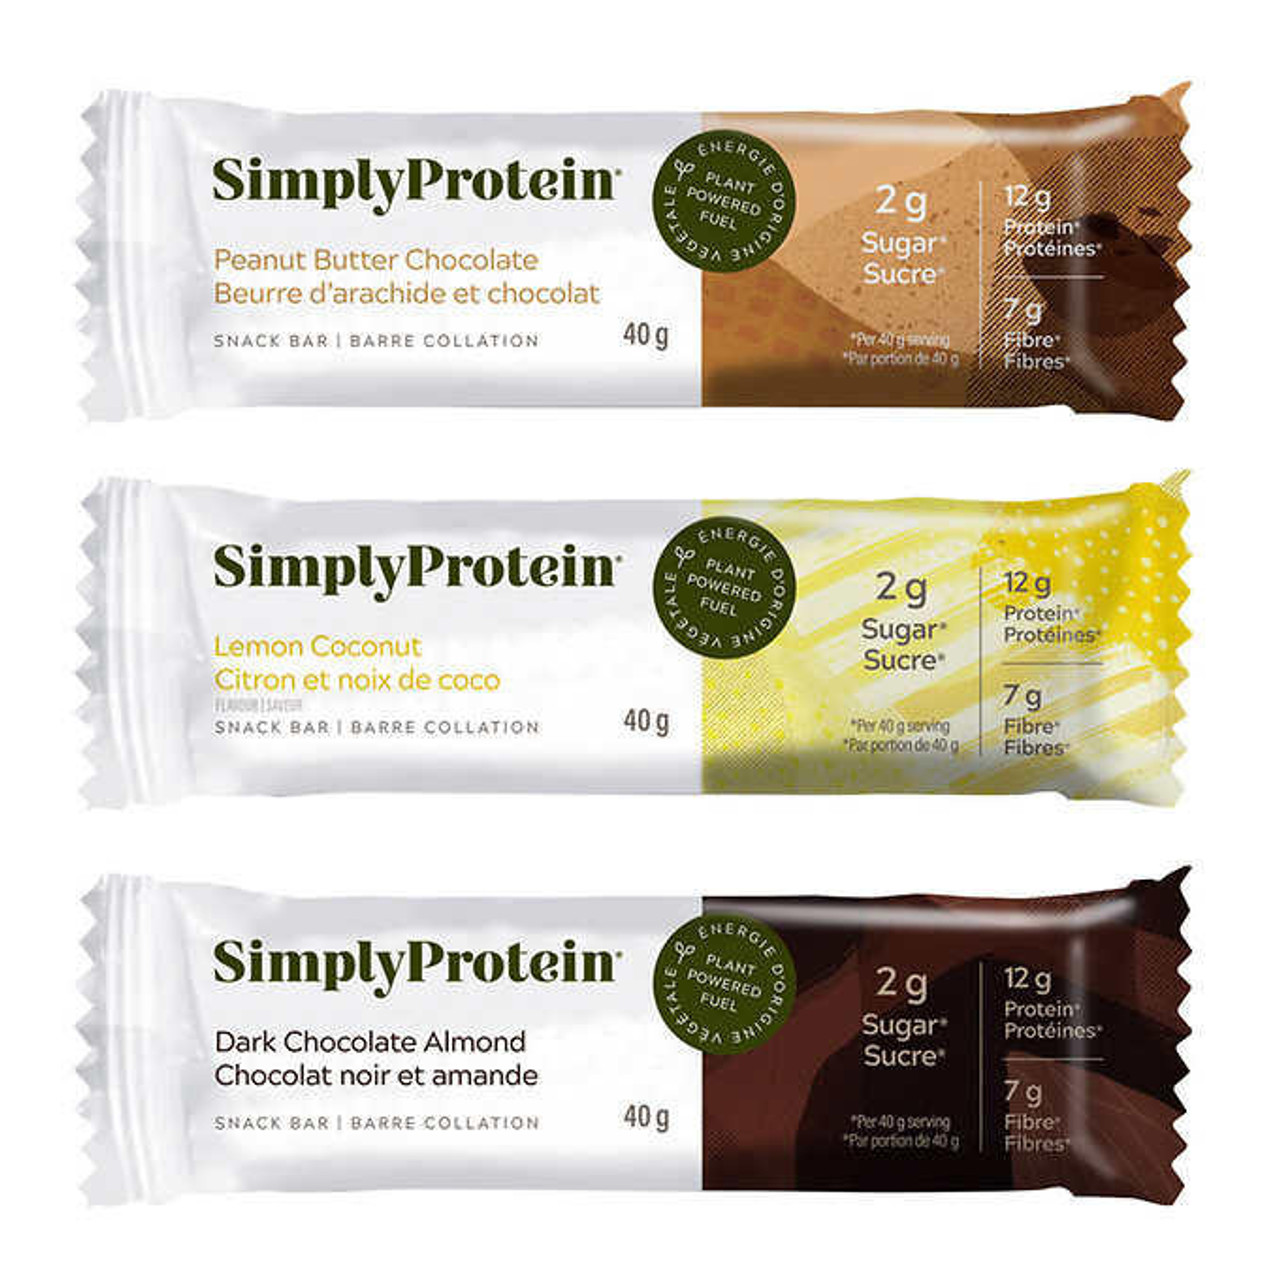 Simply Protein SimplyProtein Plant-Based Protein Bars Variety Pack - 15 Bars x 40g (6/Case) 